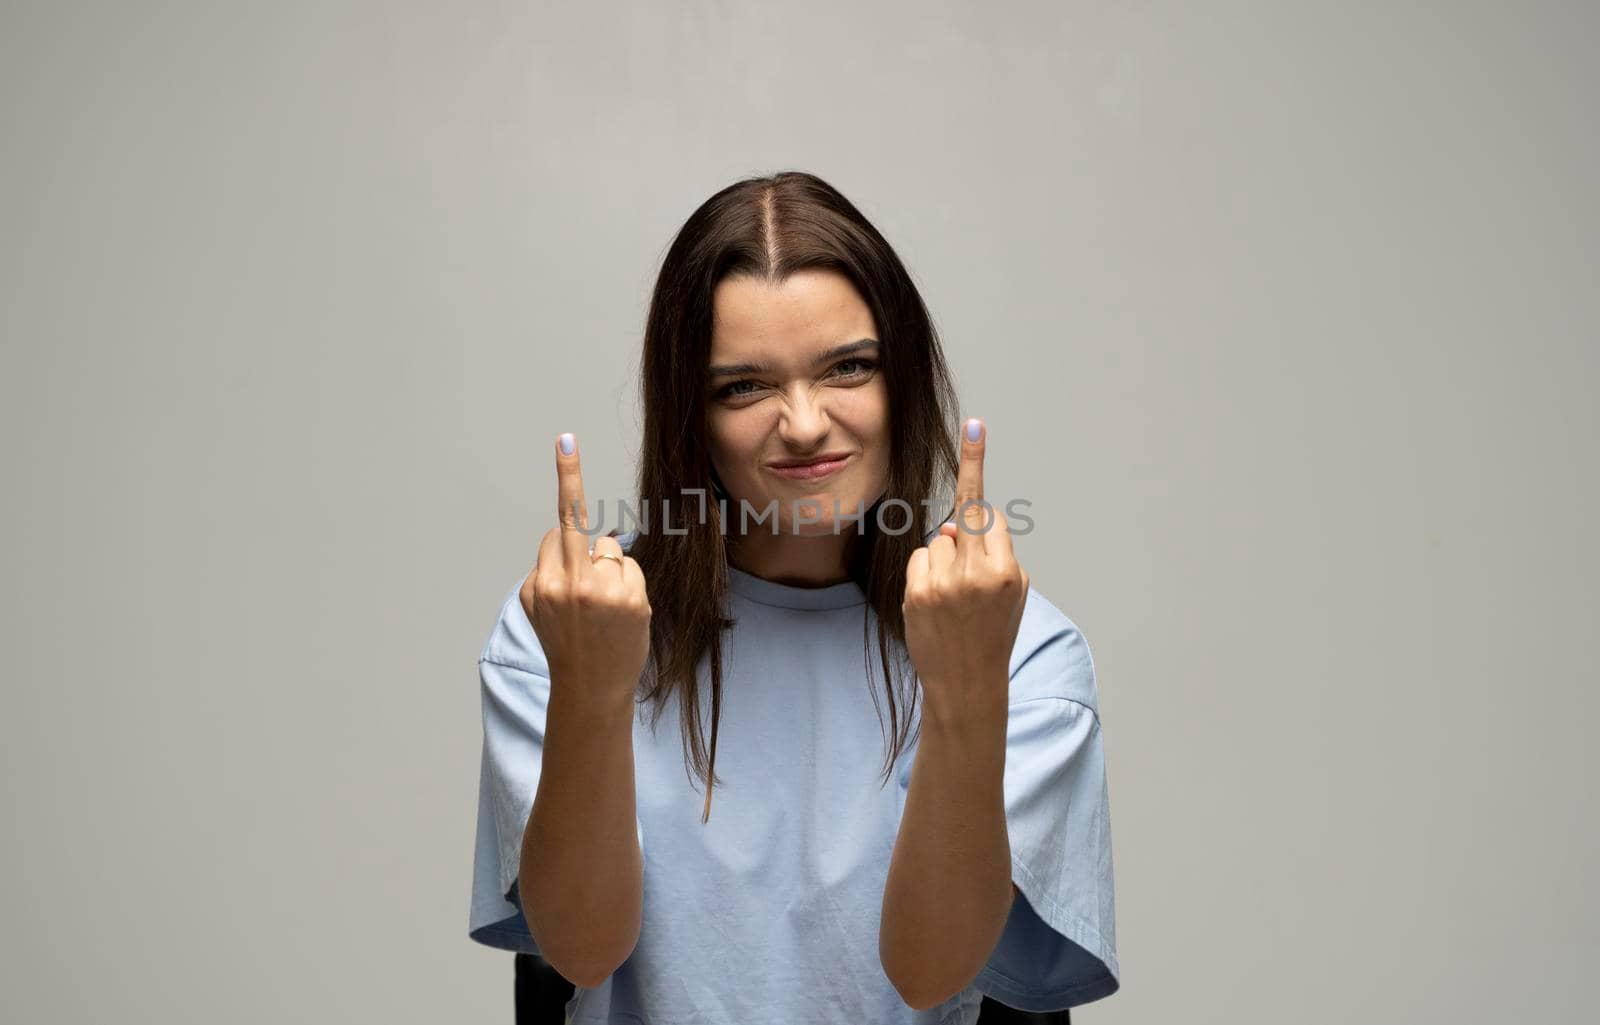 Portrait of rude vulgar woman showing middle fingers, impolite gesture of disrespect, looking with aggression hate on white background